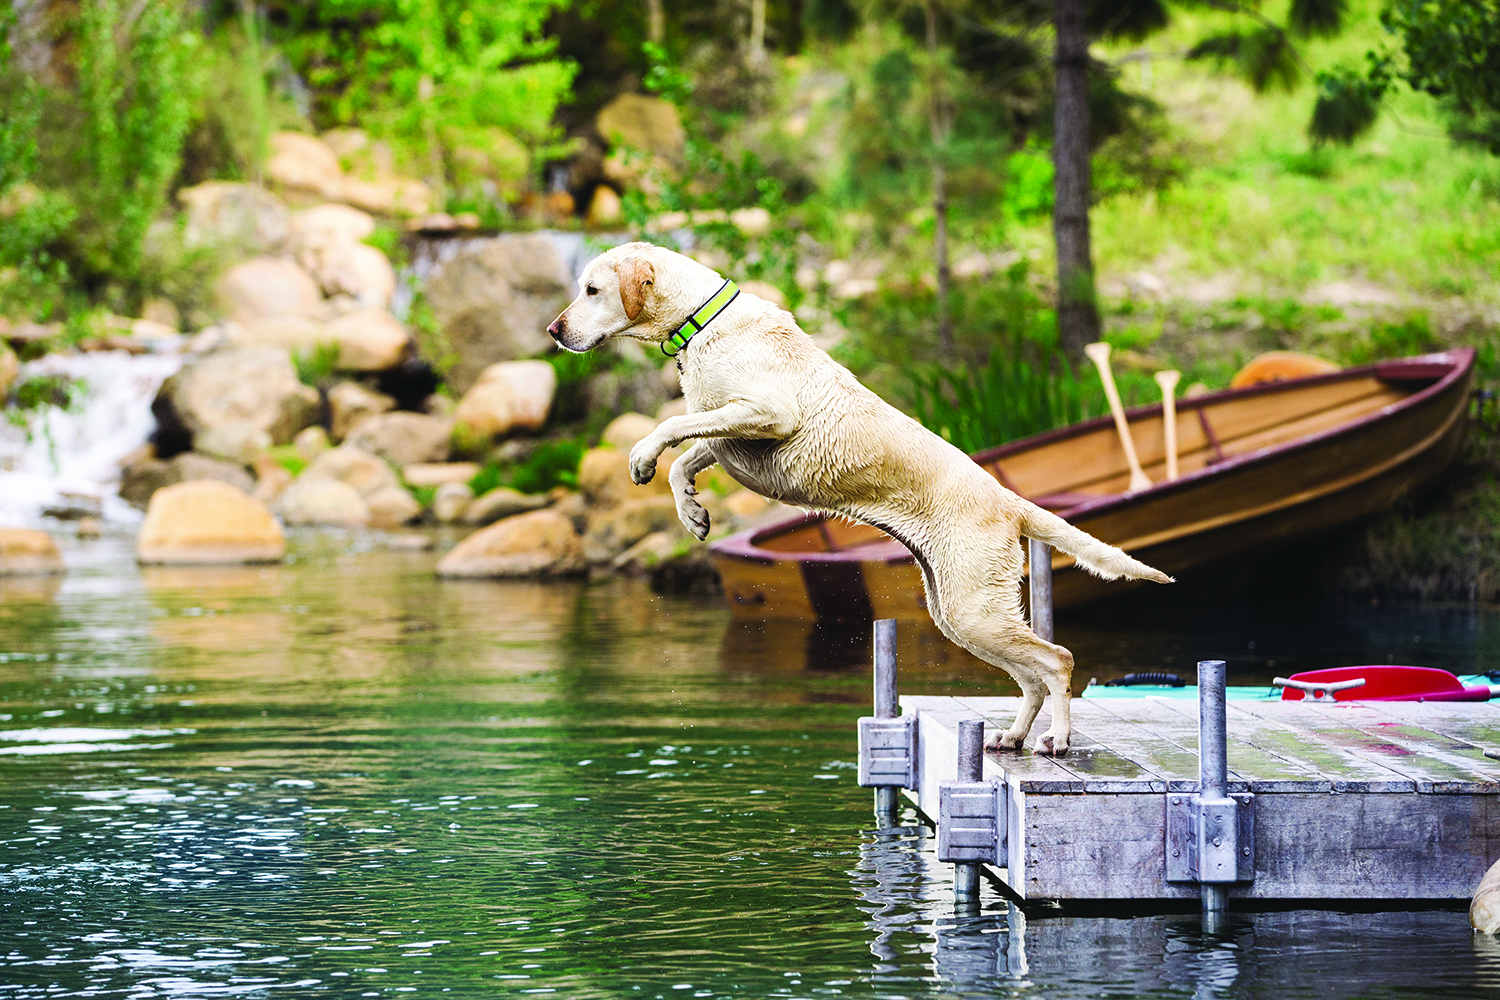 Water safety tips for dogs